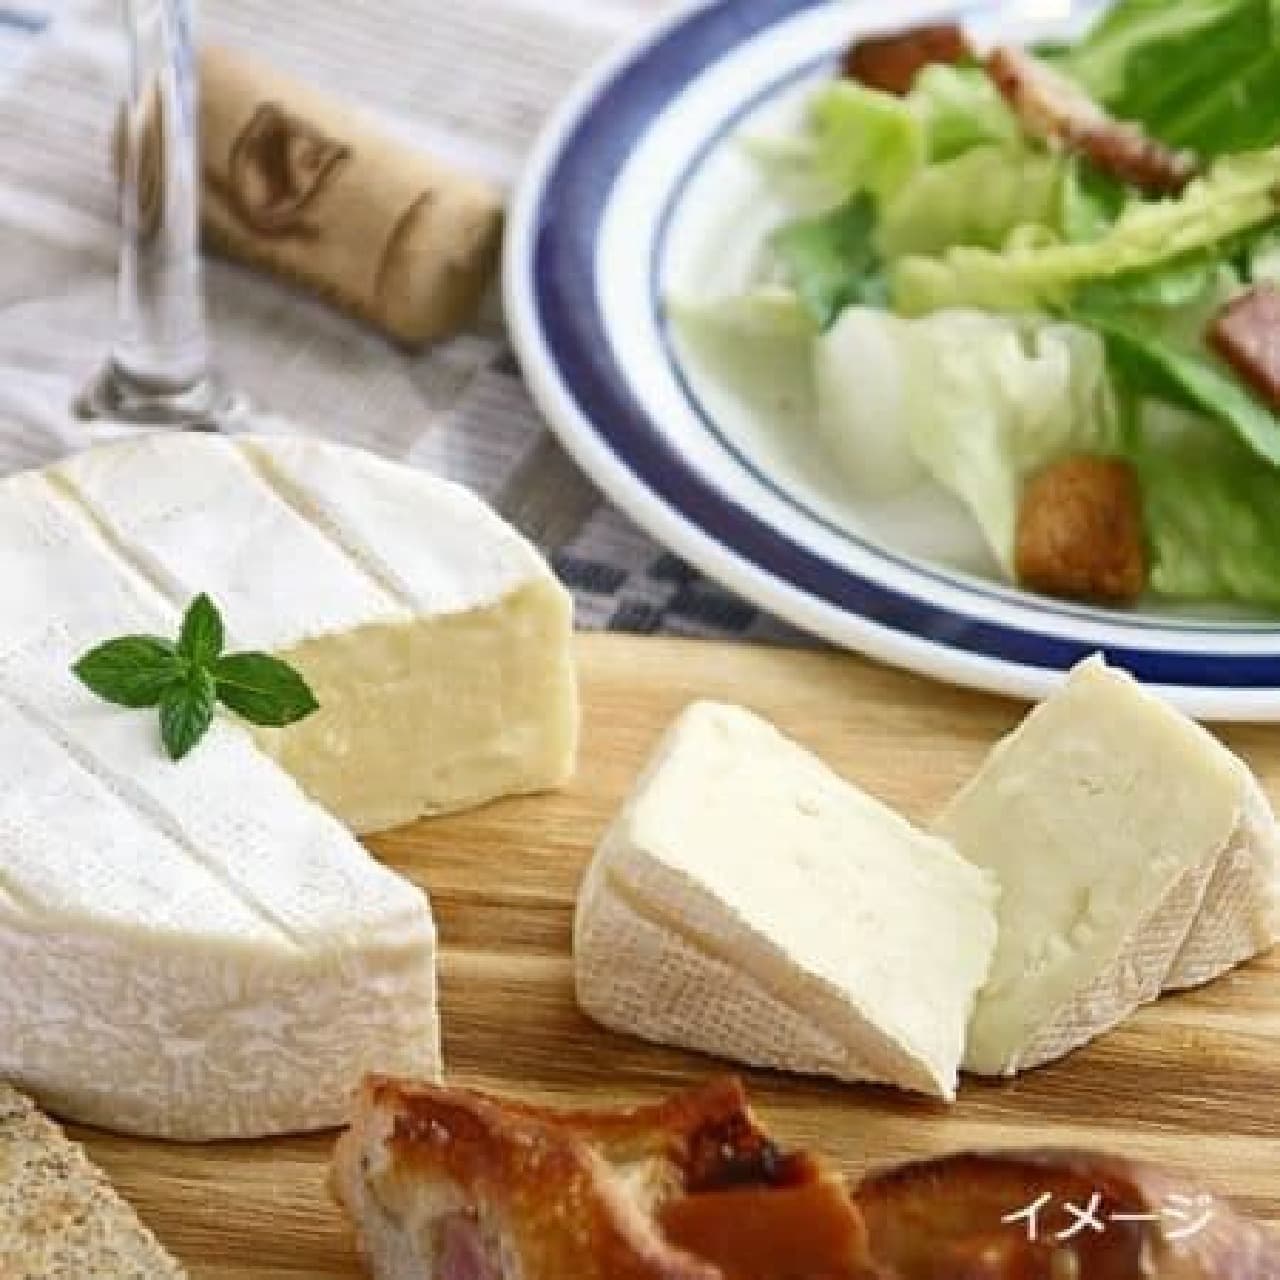 11% off popular cheese from KALDI